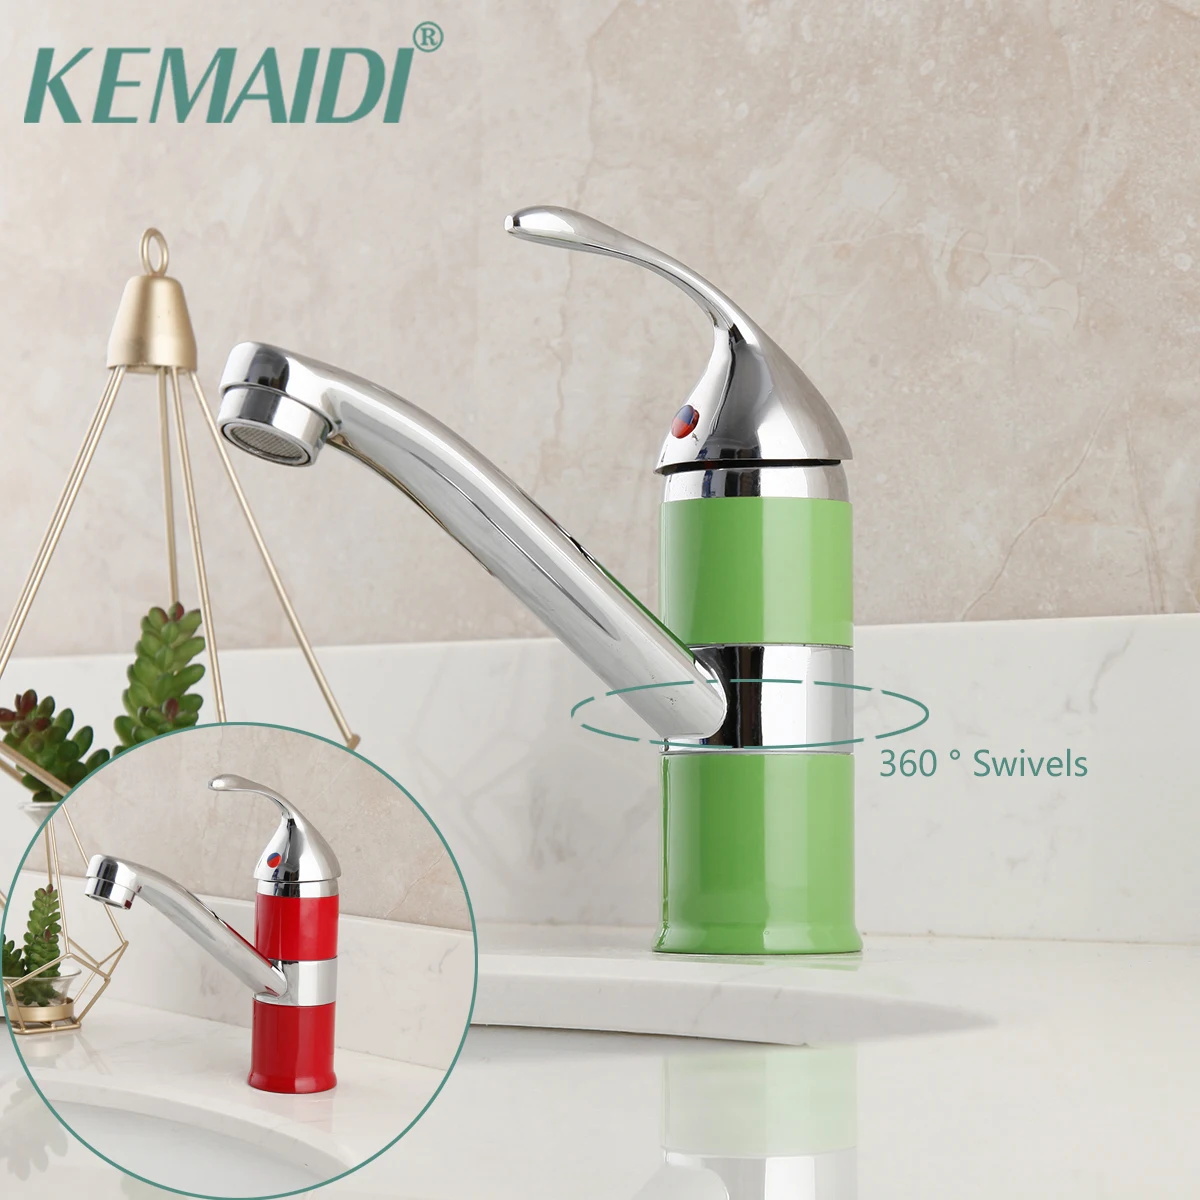 

KEMAIDI Bathroom Sink Faucet Chrome Polished Single Handle Faucets Red & Green Deck Mounted Hot & Cold Water Basin Taps